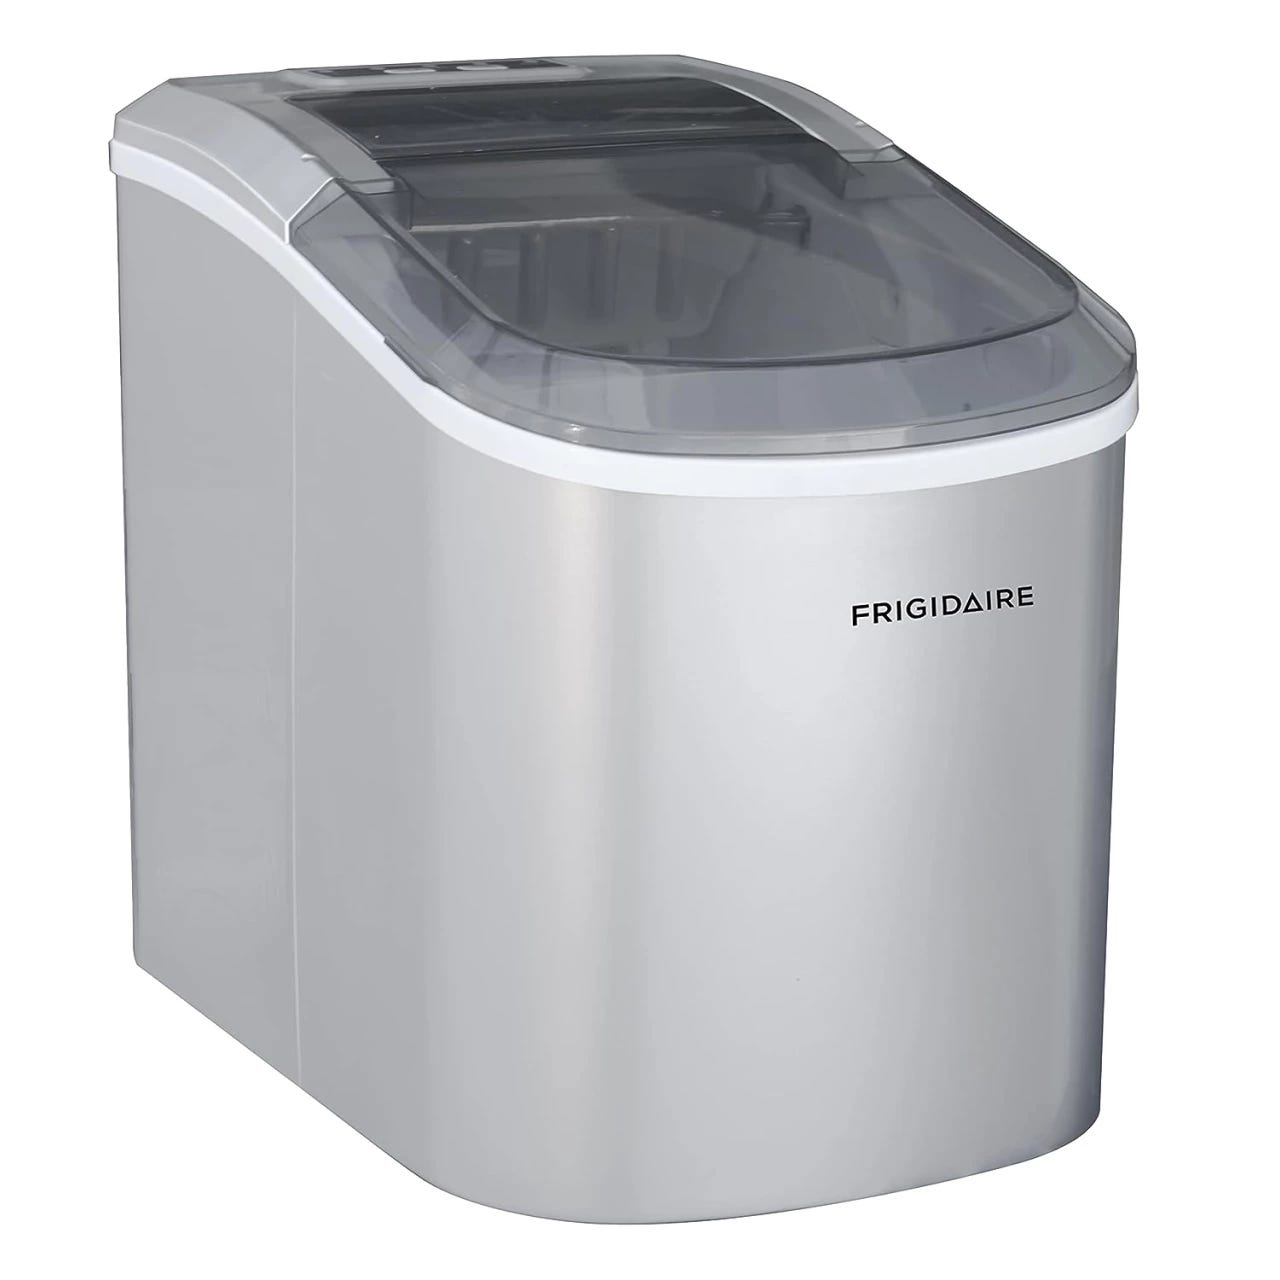 FRIGIDAIRE EFIC452-SS 40 Lbs Extra Large Clear Maker, Stainless Steel,  Makes Square Ice